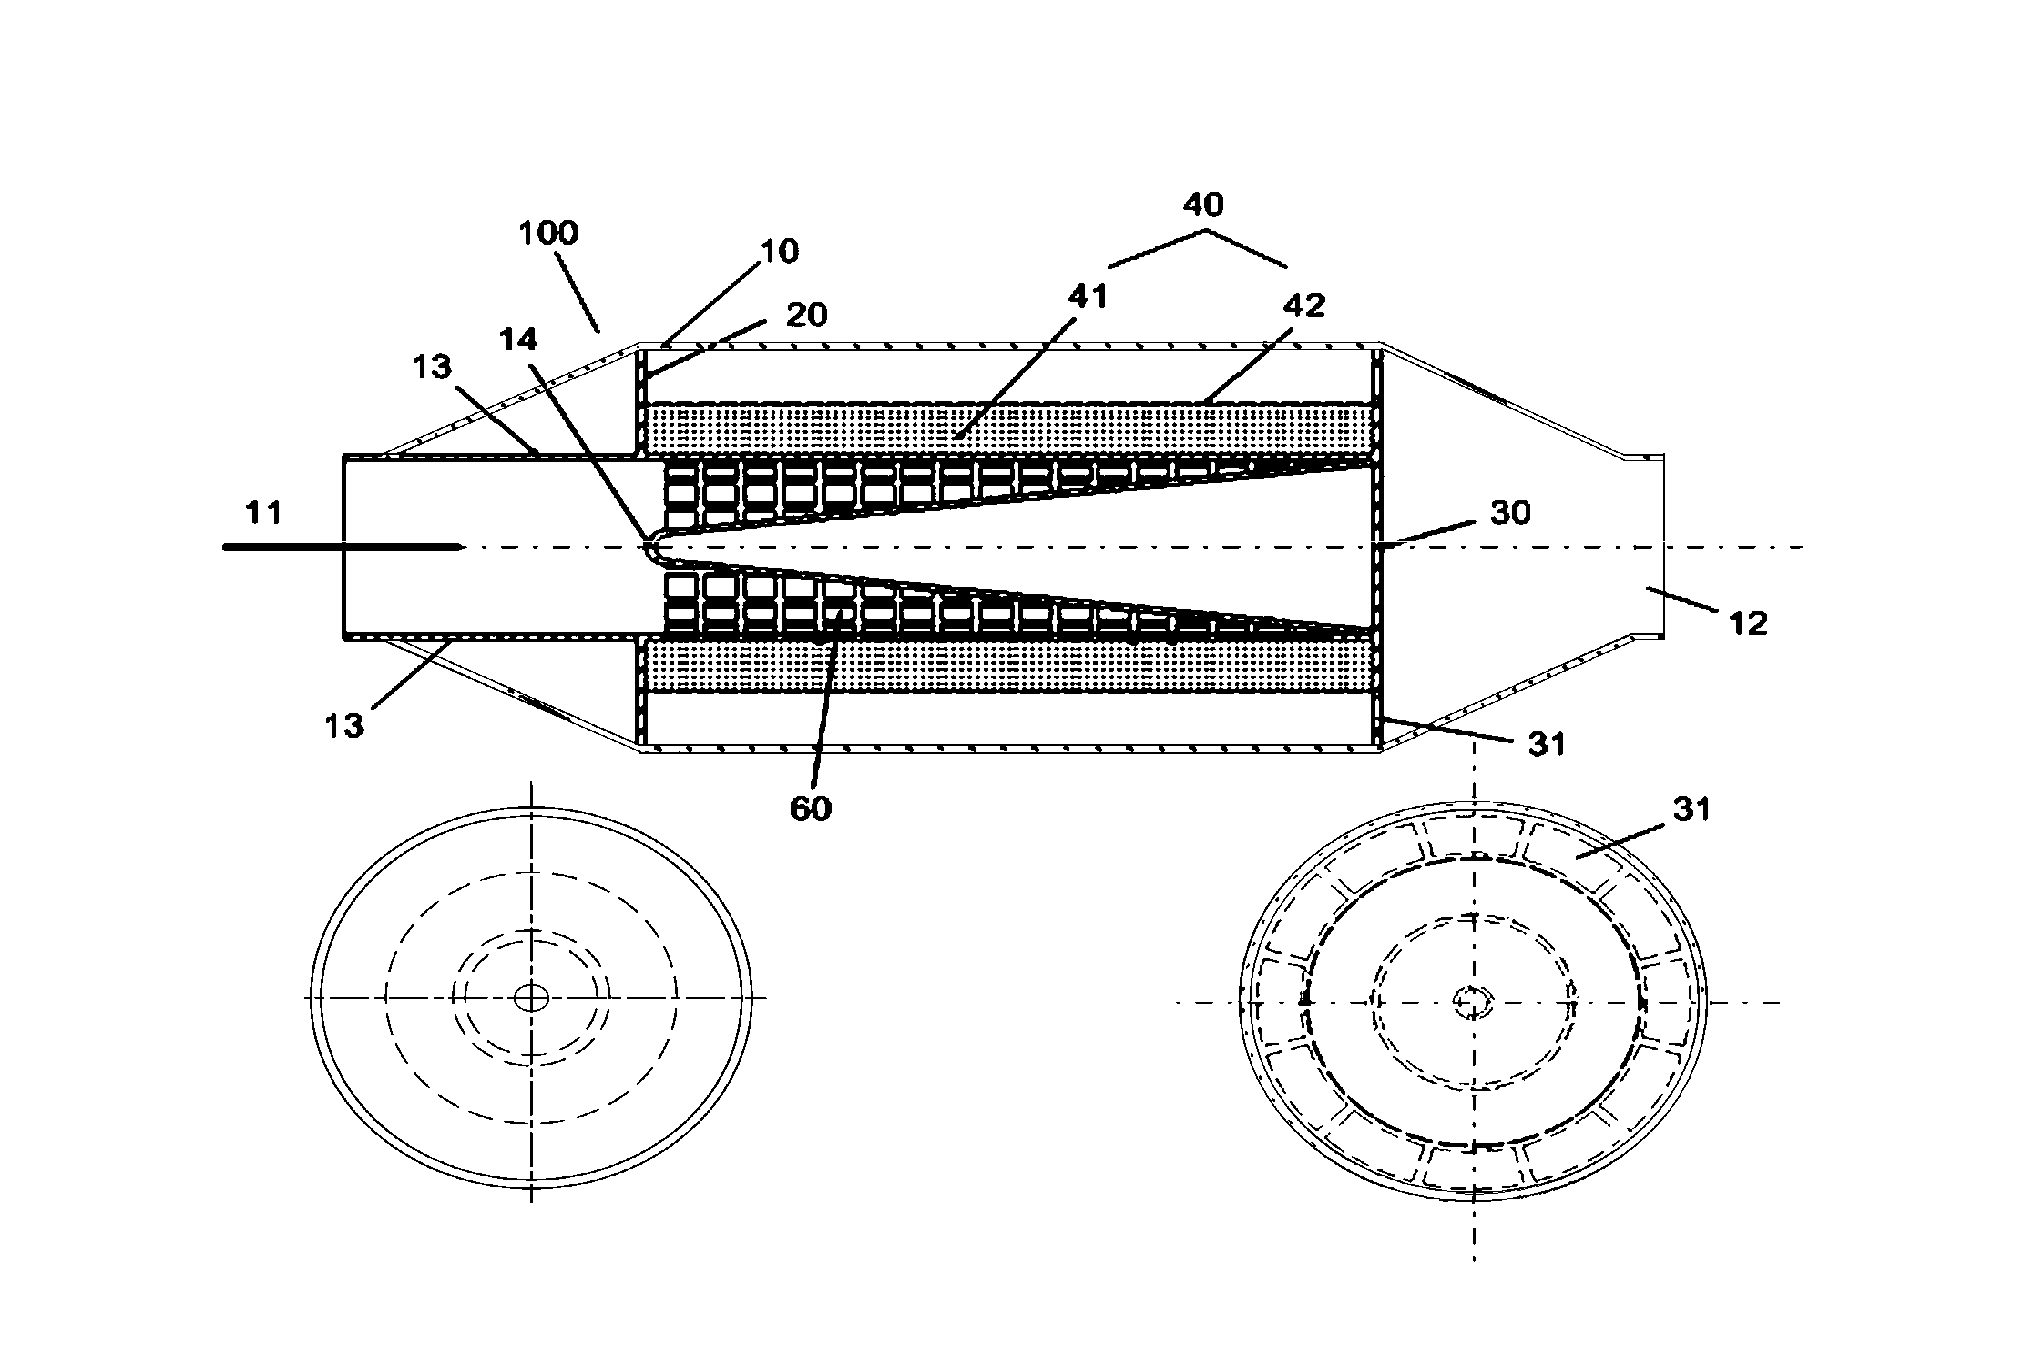 Filter device for filtering automobile exhaust gas